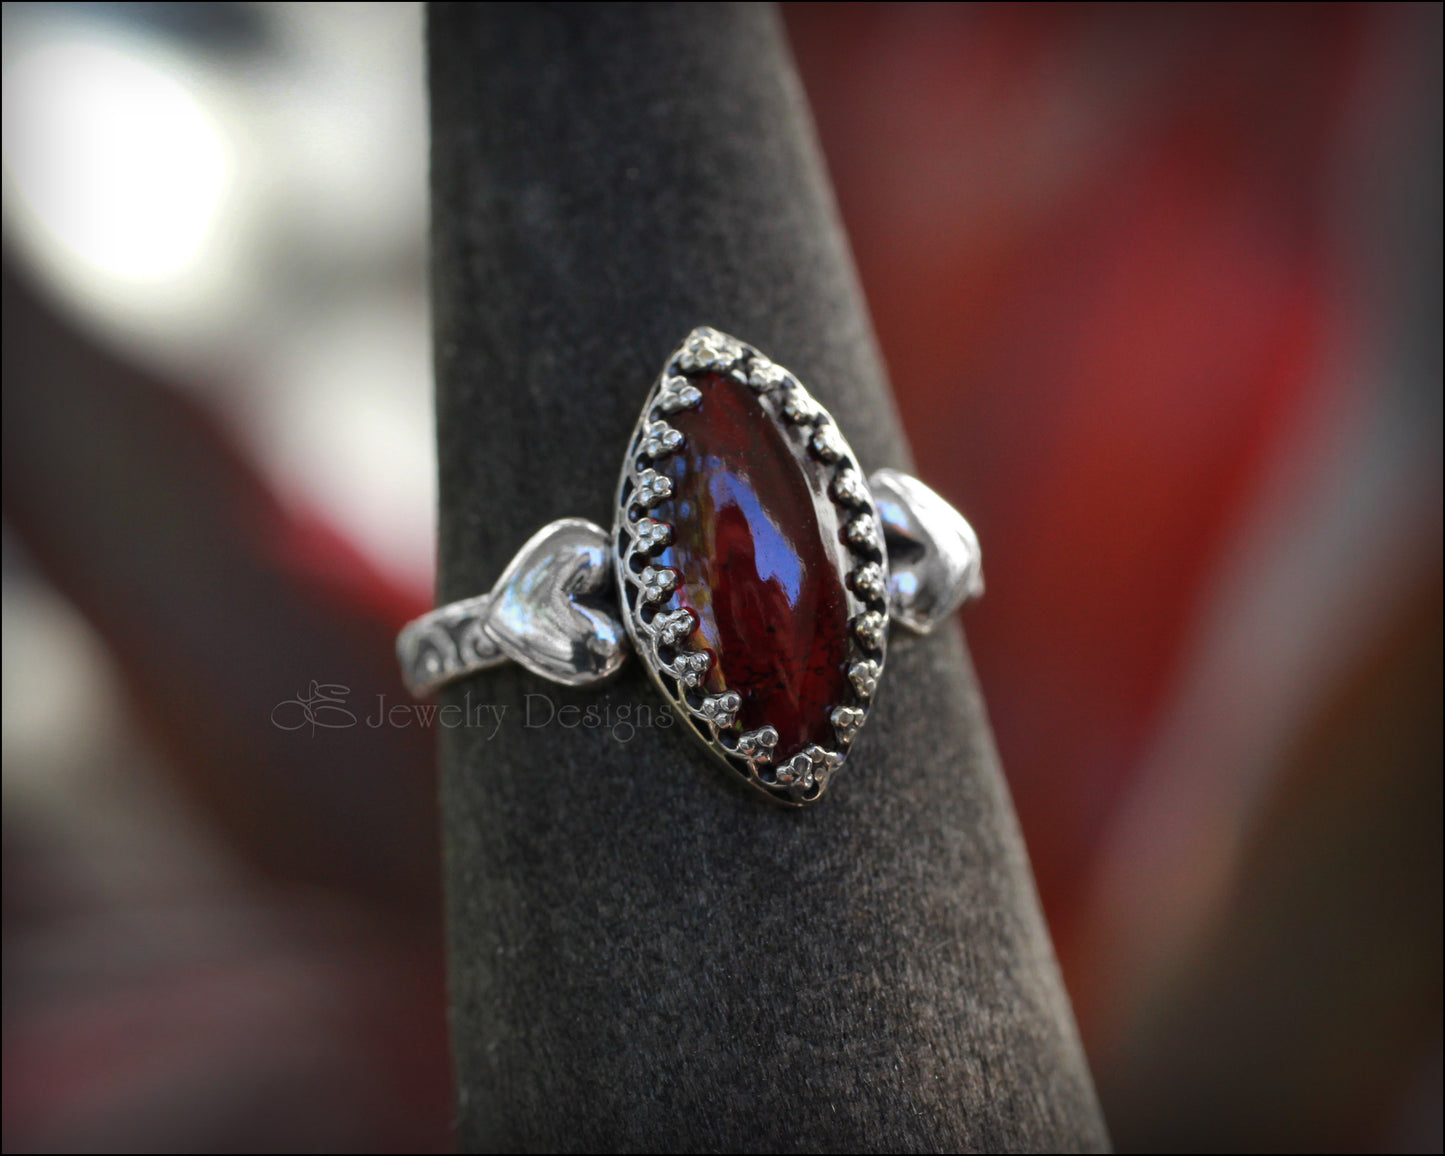 Load image into Gallery viewer, Victorian Style Sweetheart Ring - (choose stone) - LE Jewelry Designs
